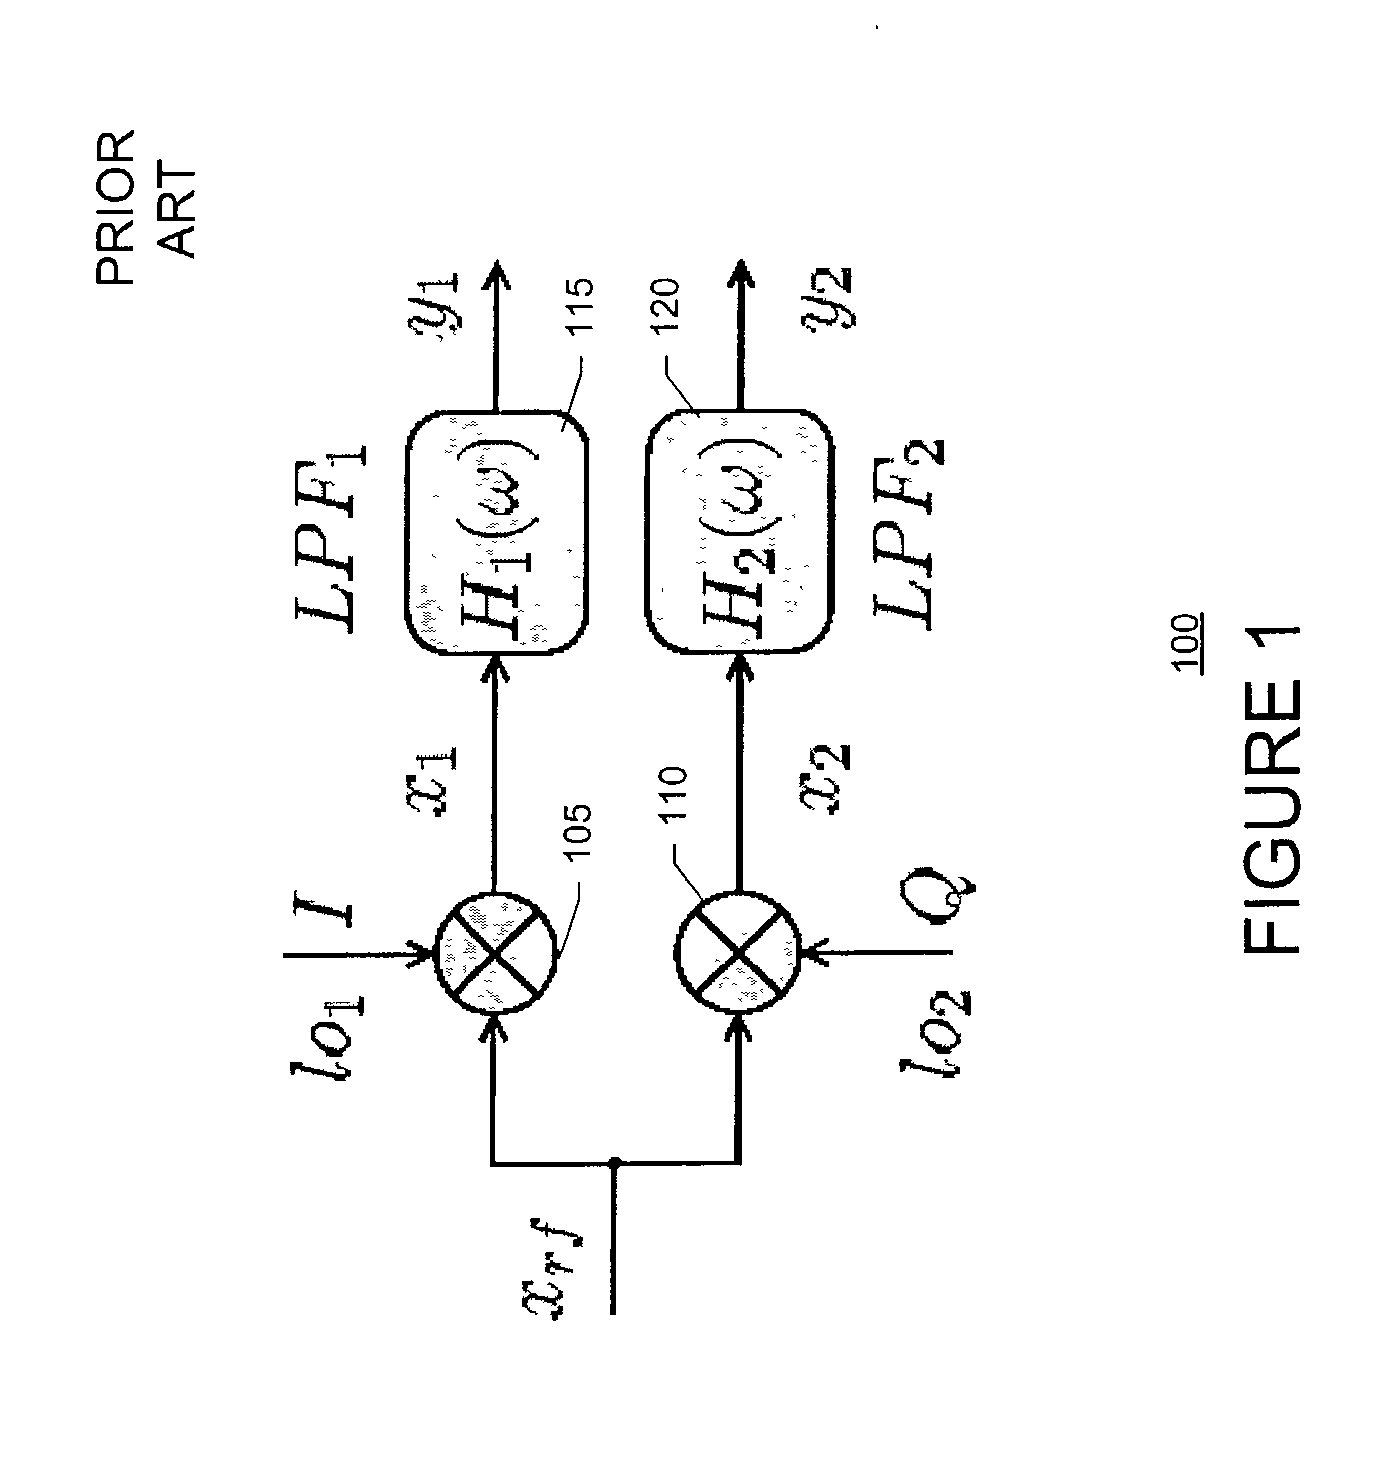 Polyphase filter with low-pass response